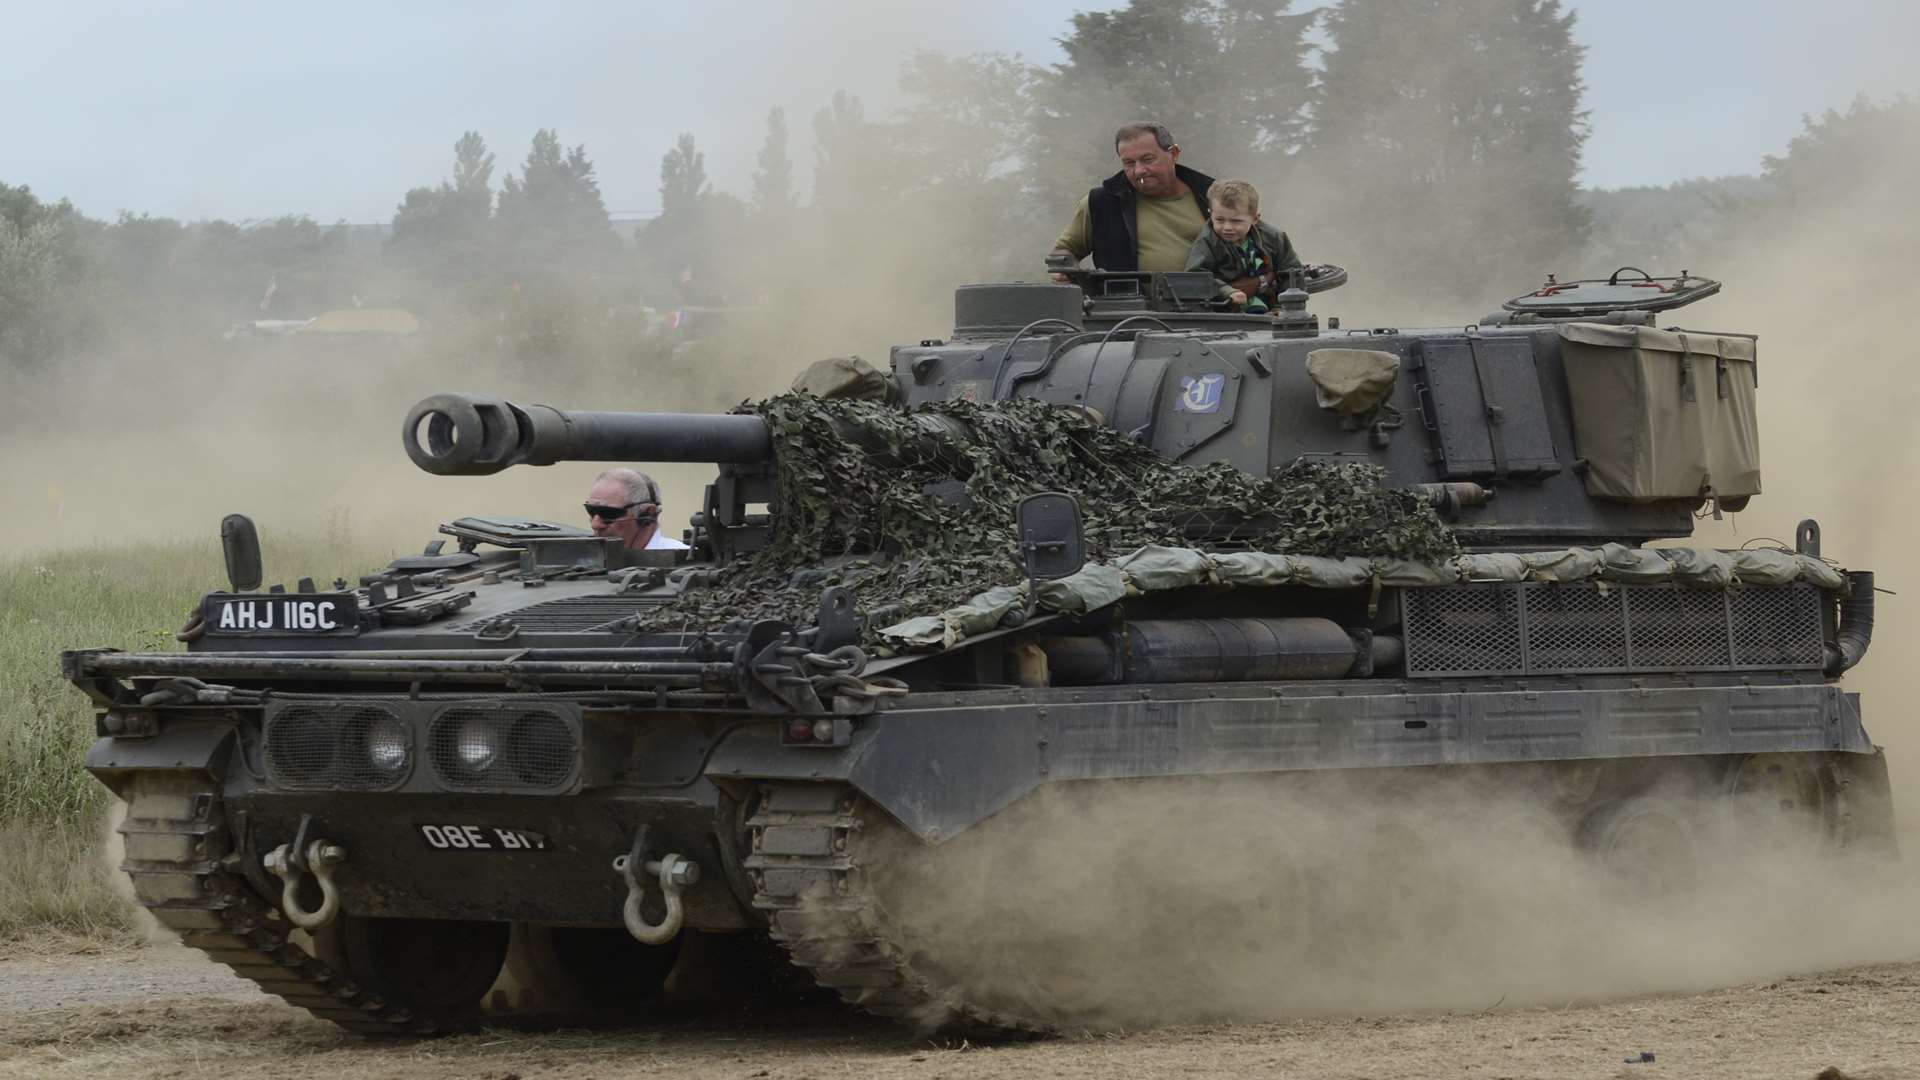 The War and Peace revival is the UK's largest vintage and military festival